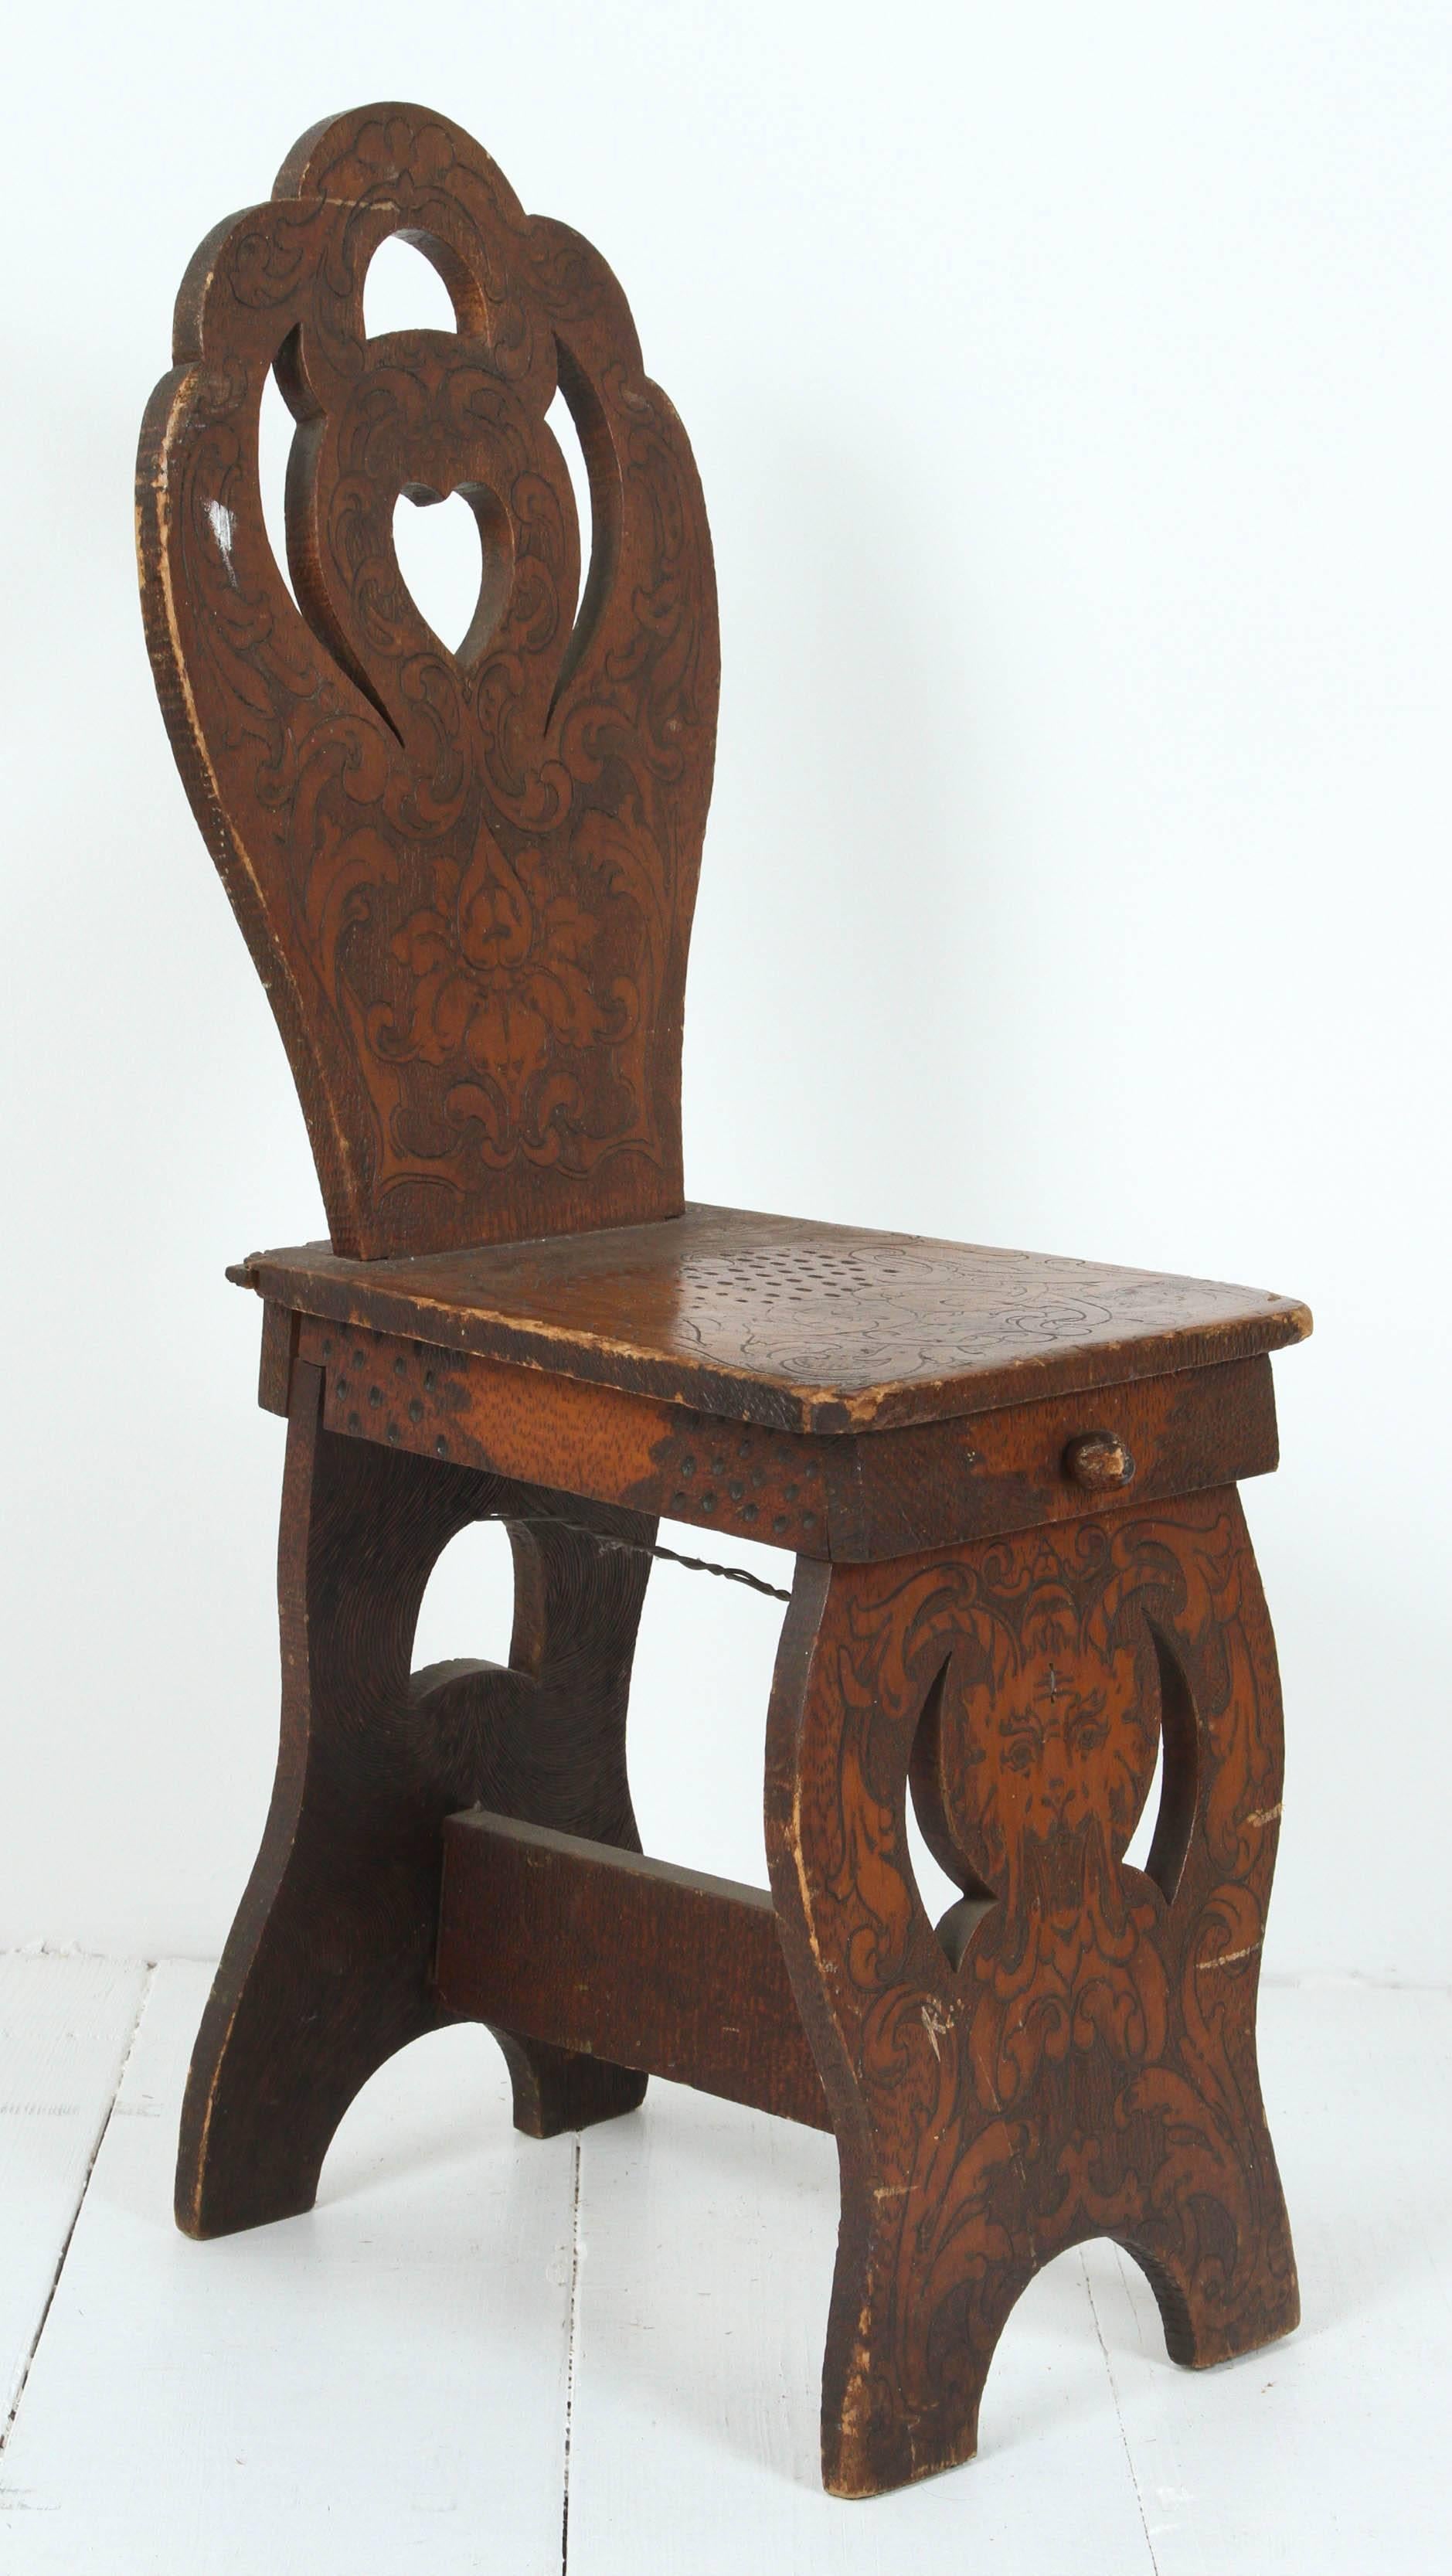 Vintage Folk style side chair with sculptural details.